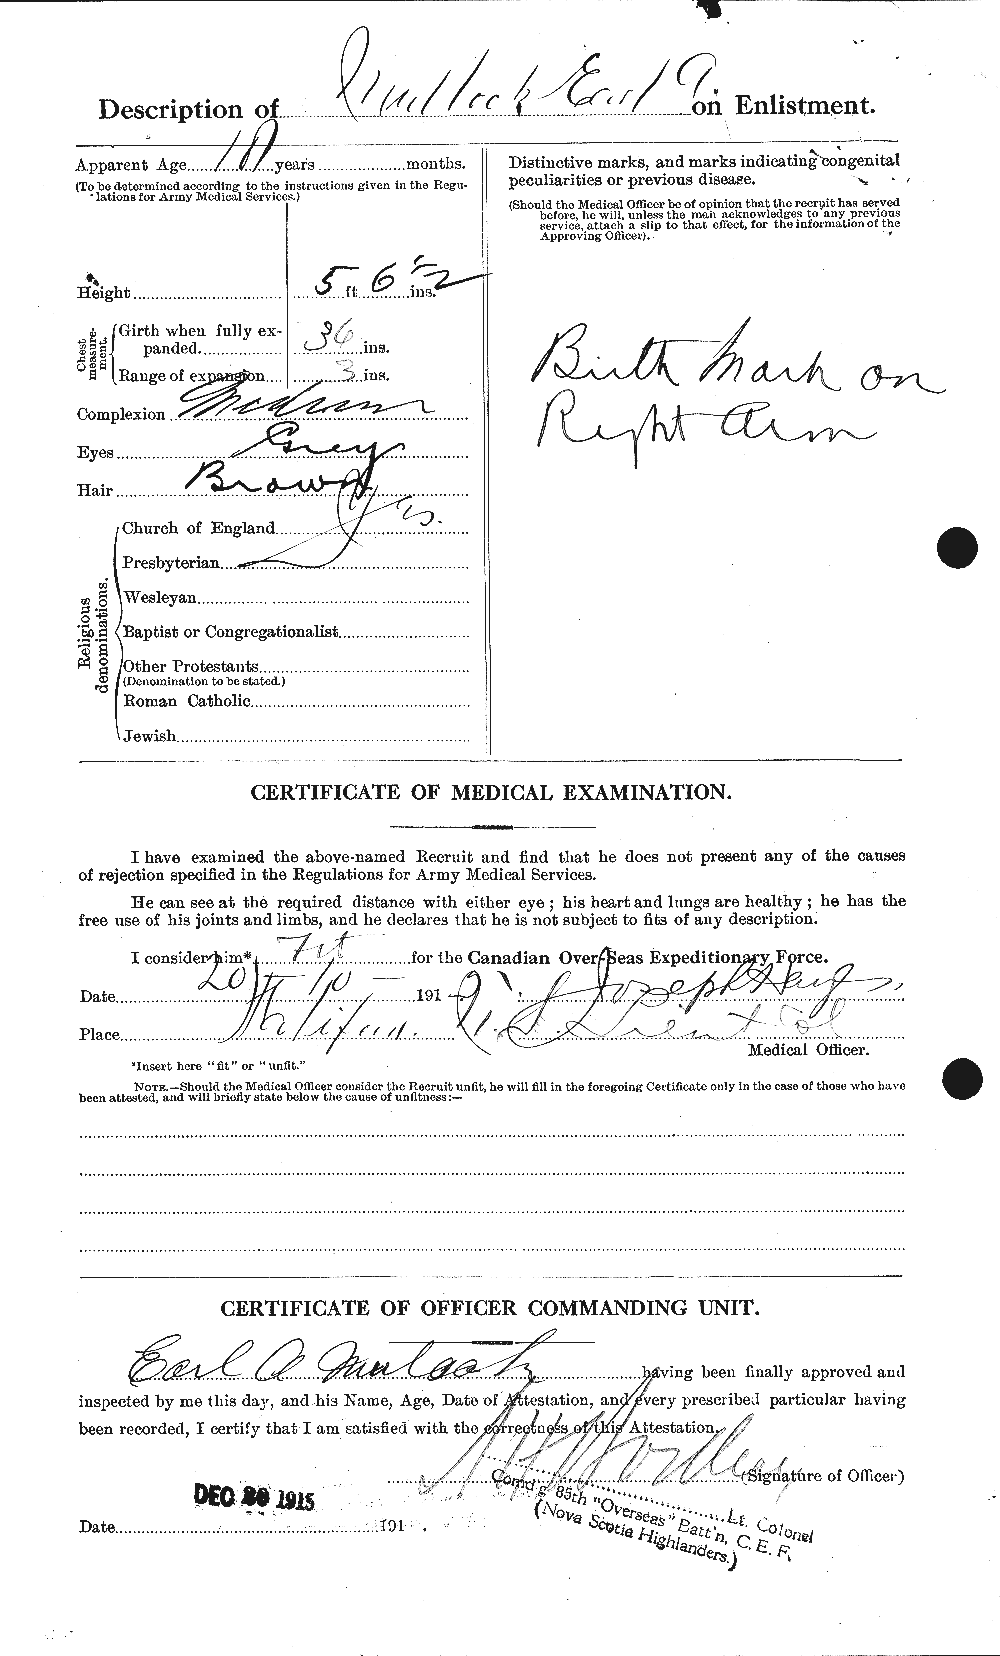 Personnel Records of the First World War - CEF 513544b